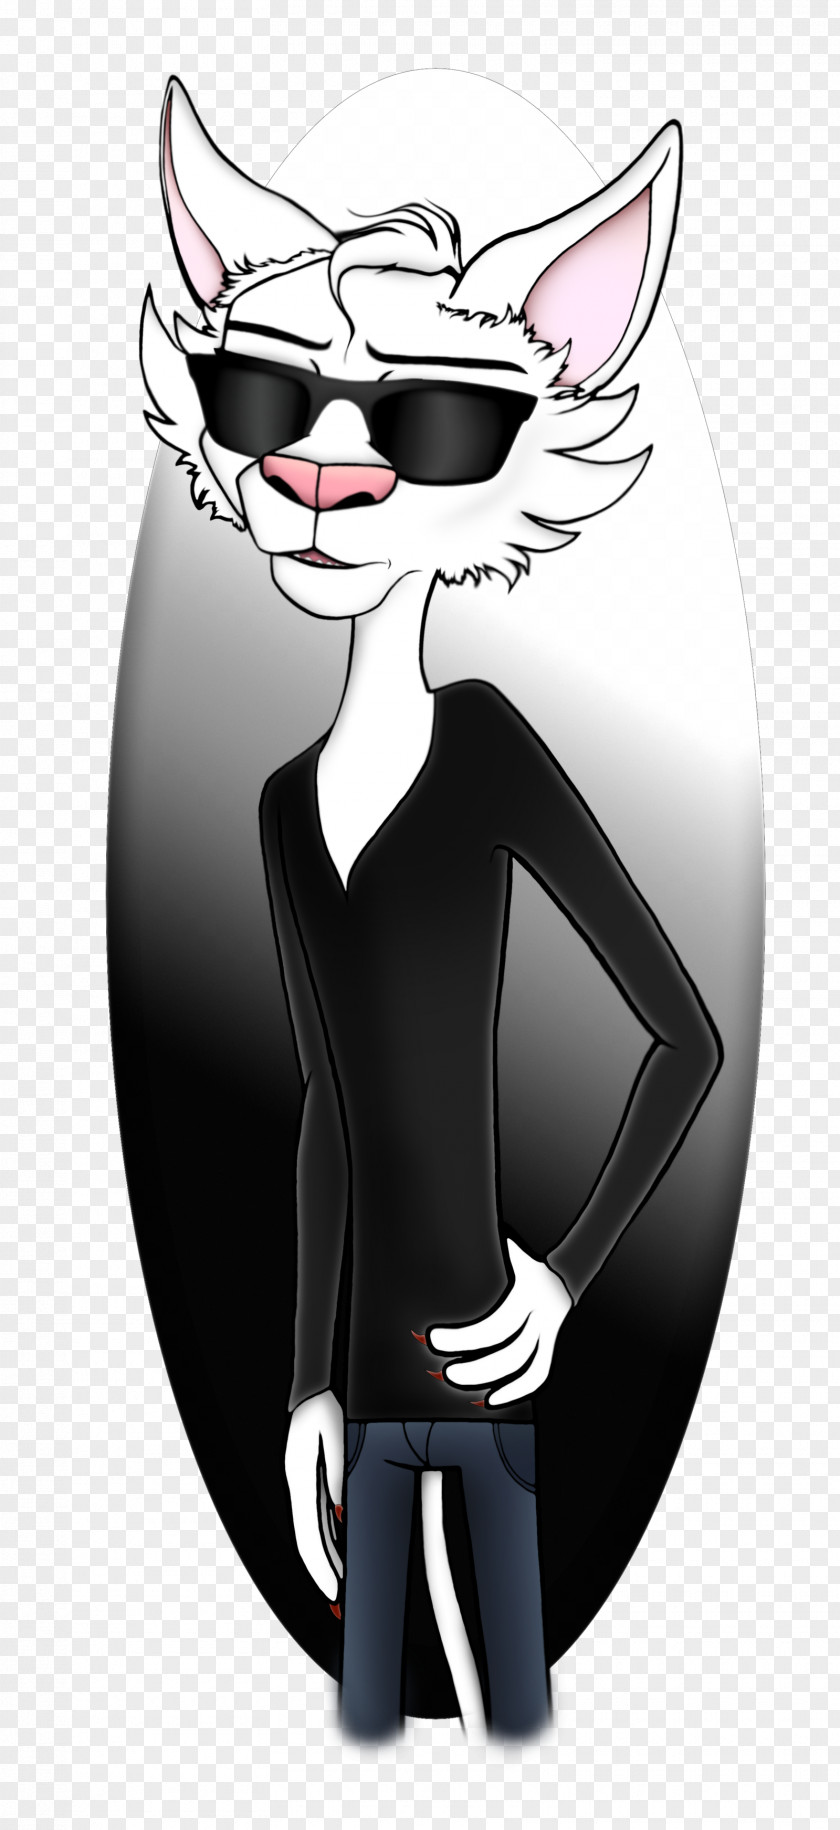 Cat Whiskers Glasses PNG